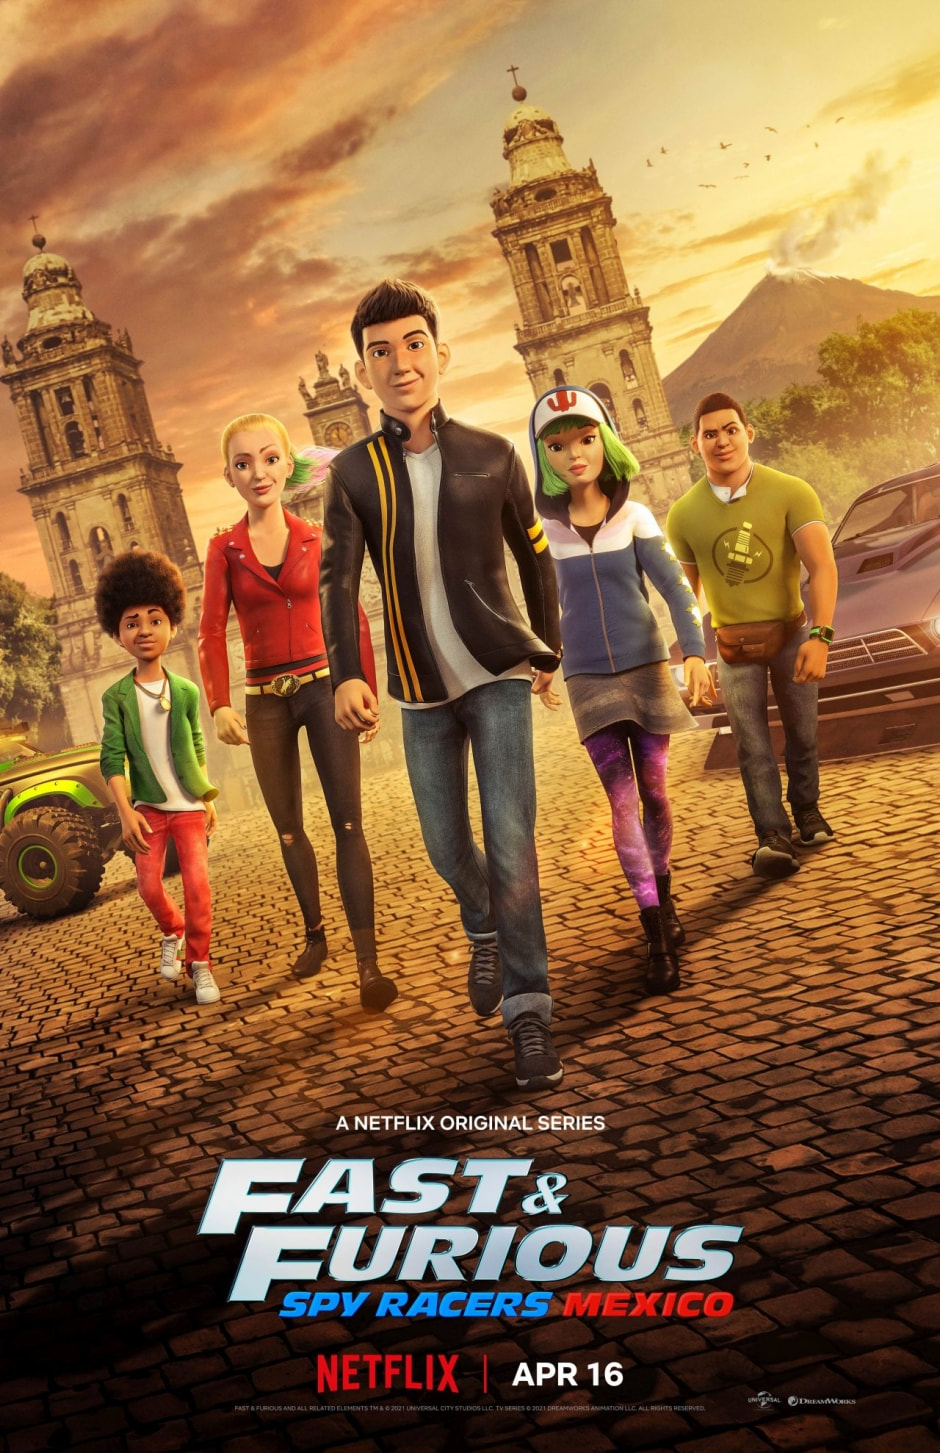 Fast And Furious Spy Racers Mexico Premieres On Netflix On April 16 My Life Is A Journey Not A